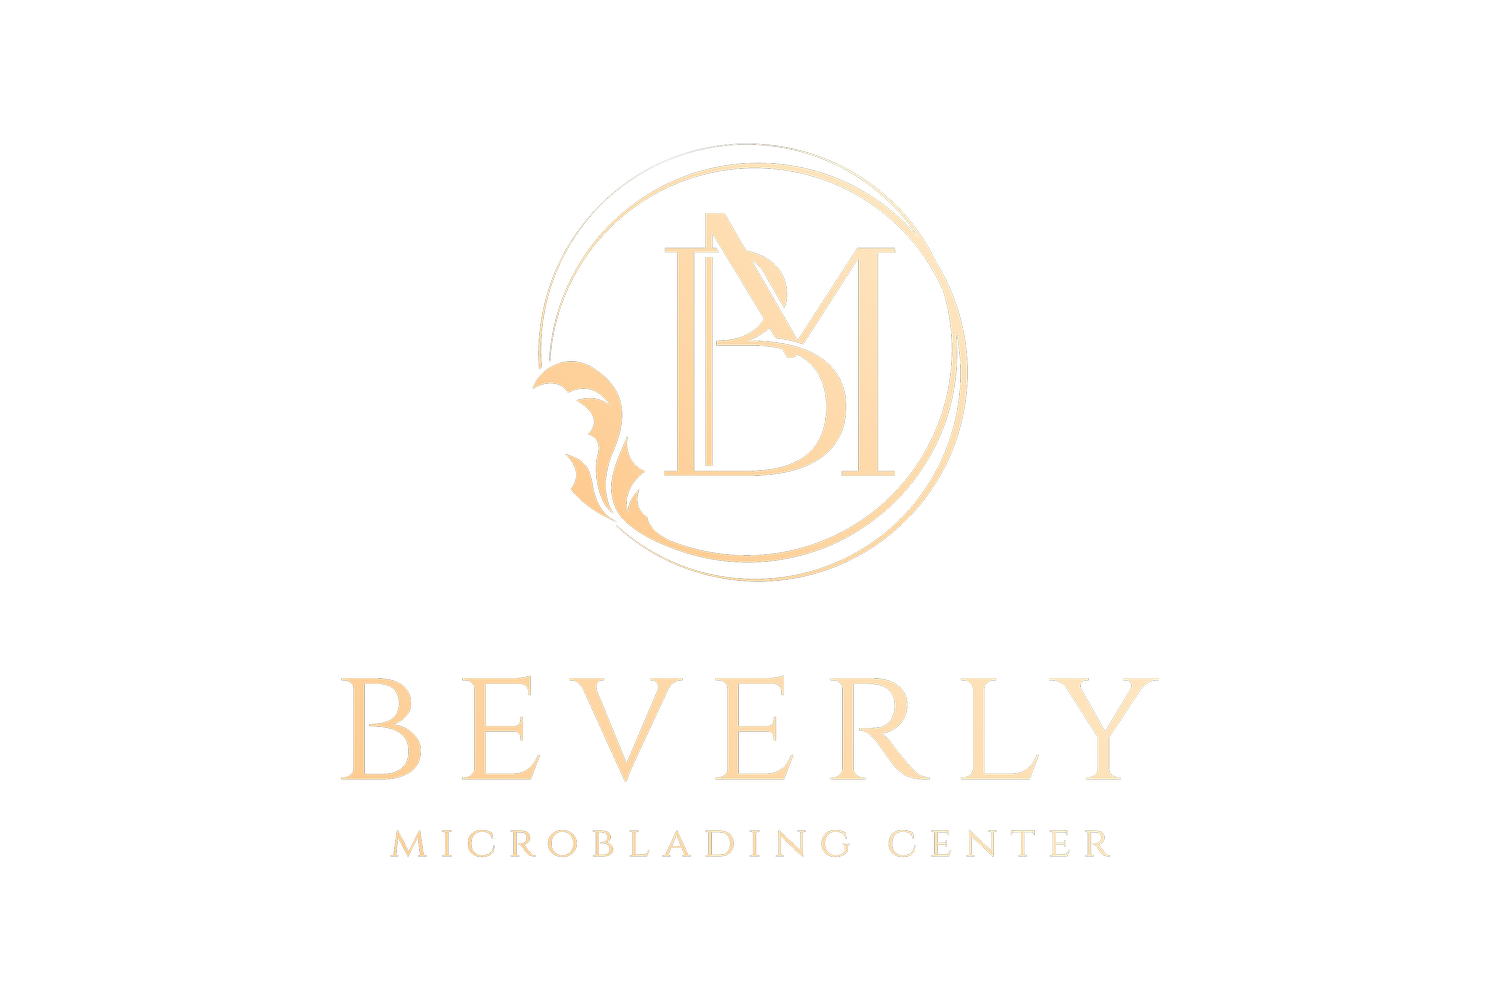 Beverly Microblading Centerbeverly